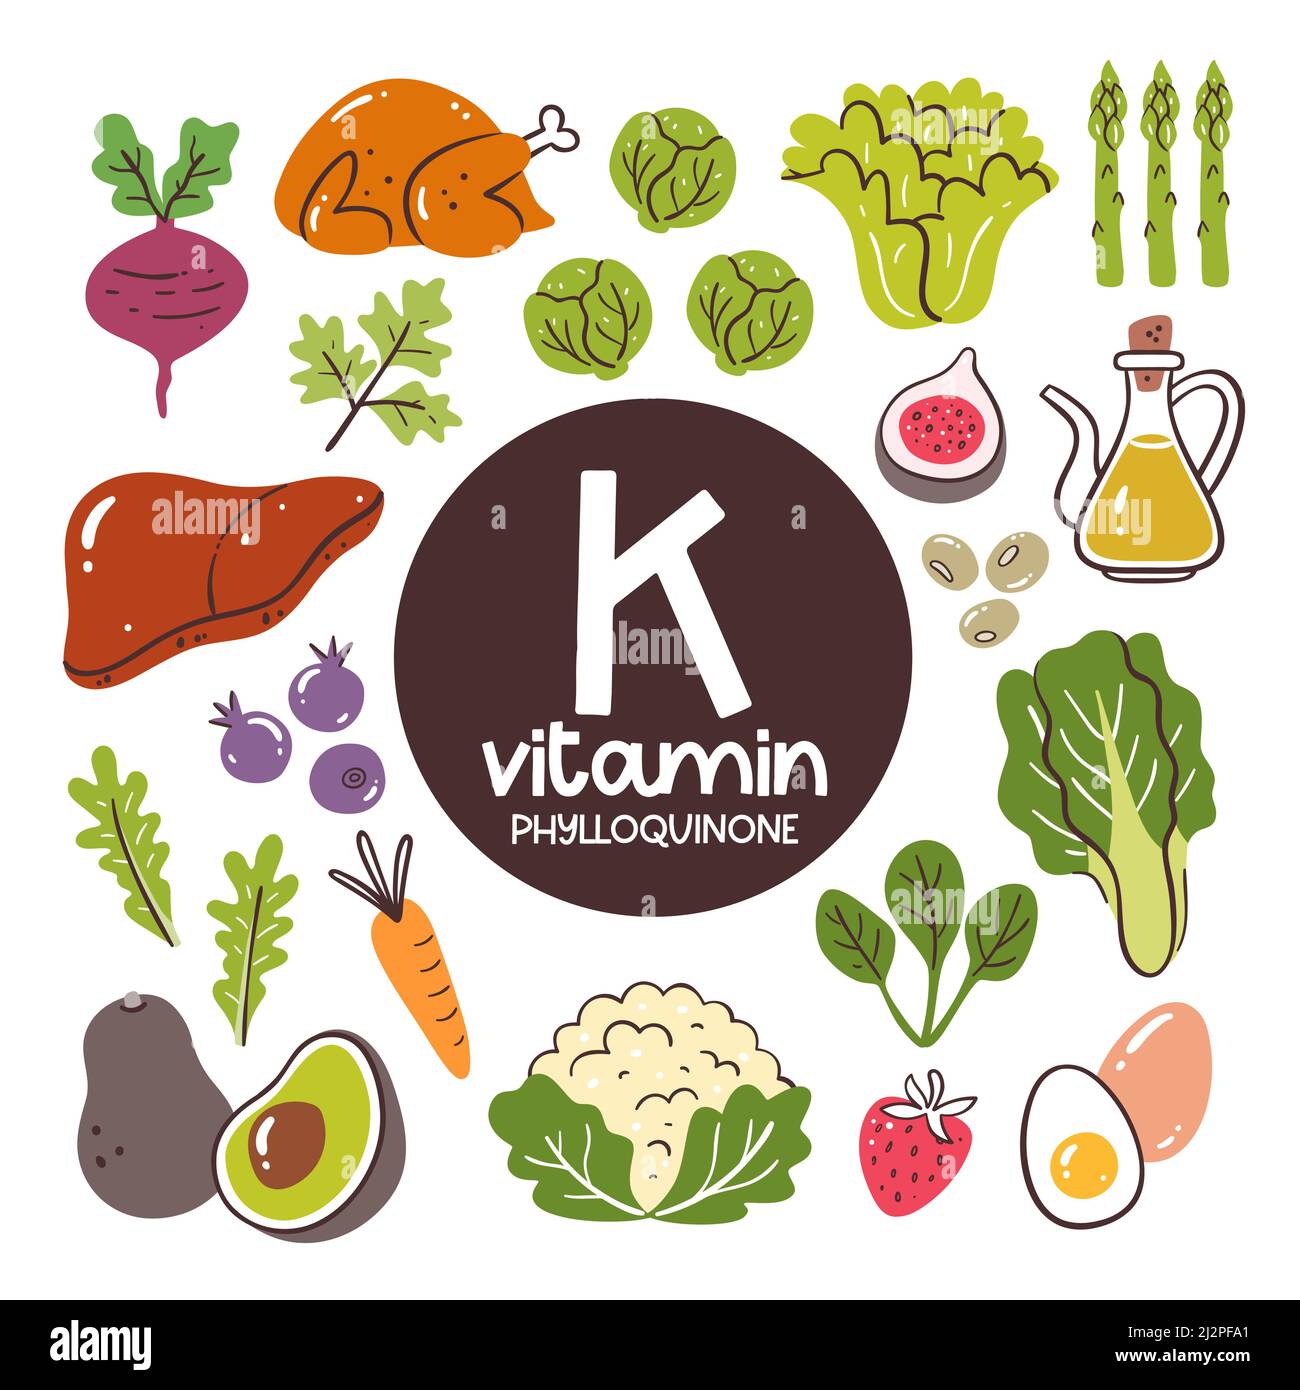 Food products with high level of Vitamin K (Phylloquinone). Cooking ingredients. Vegetables, fruits, eggs, meat, oil. Stock Vector